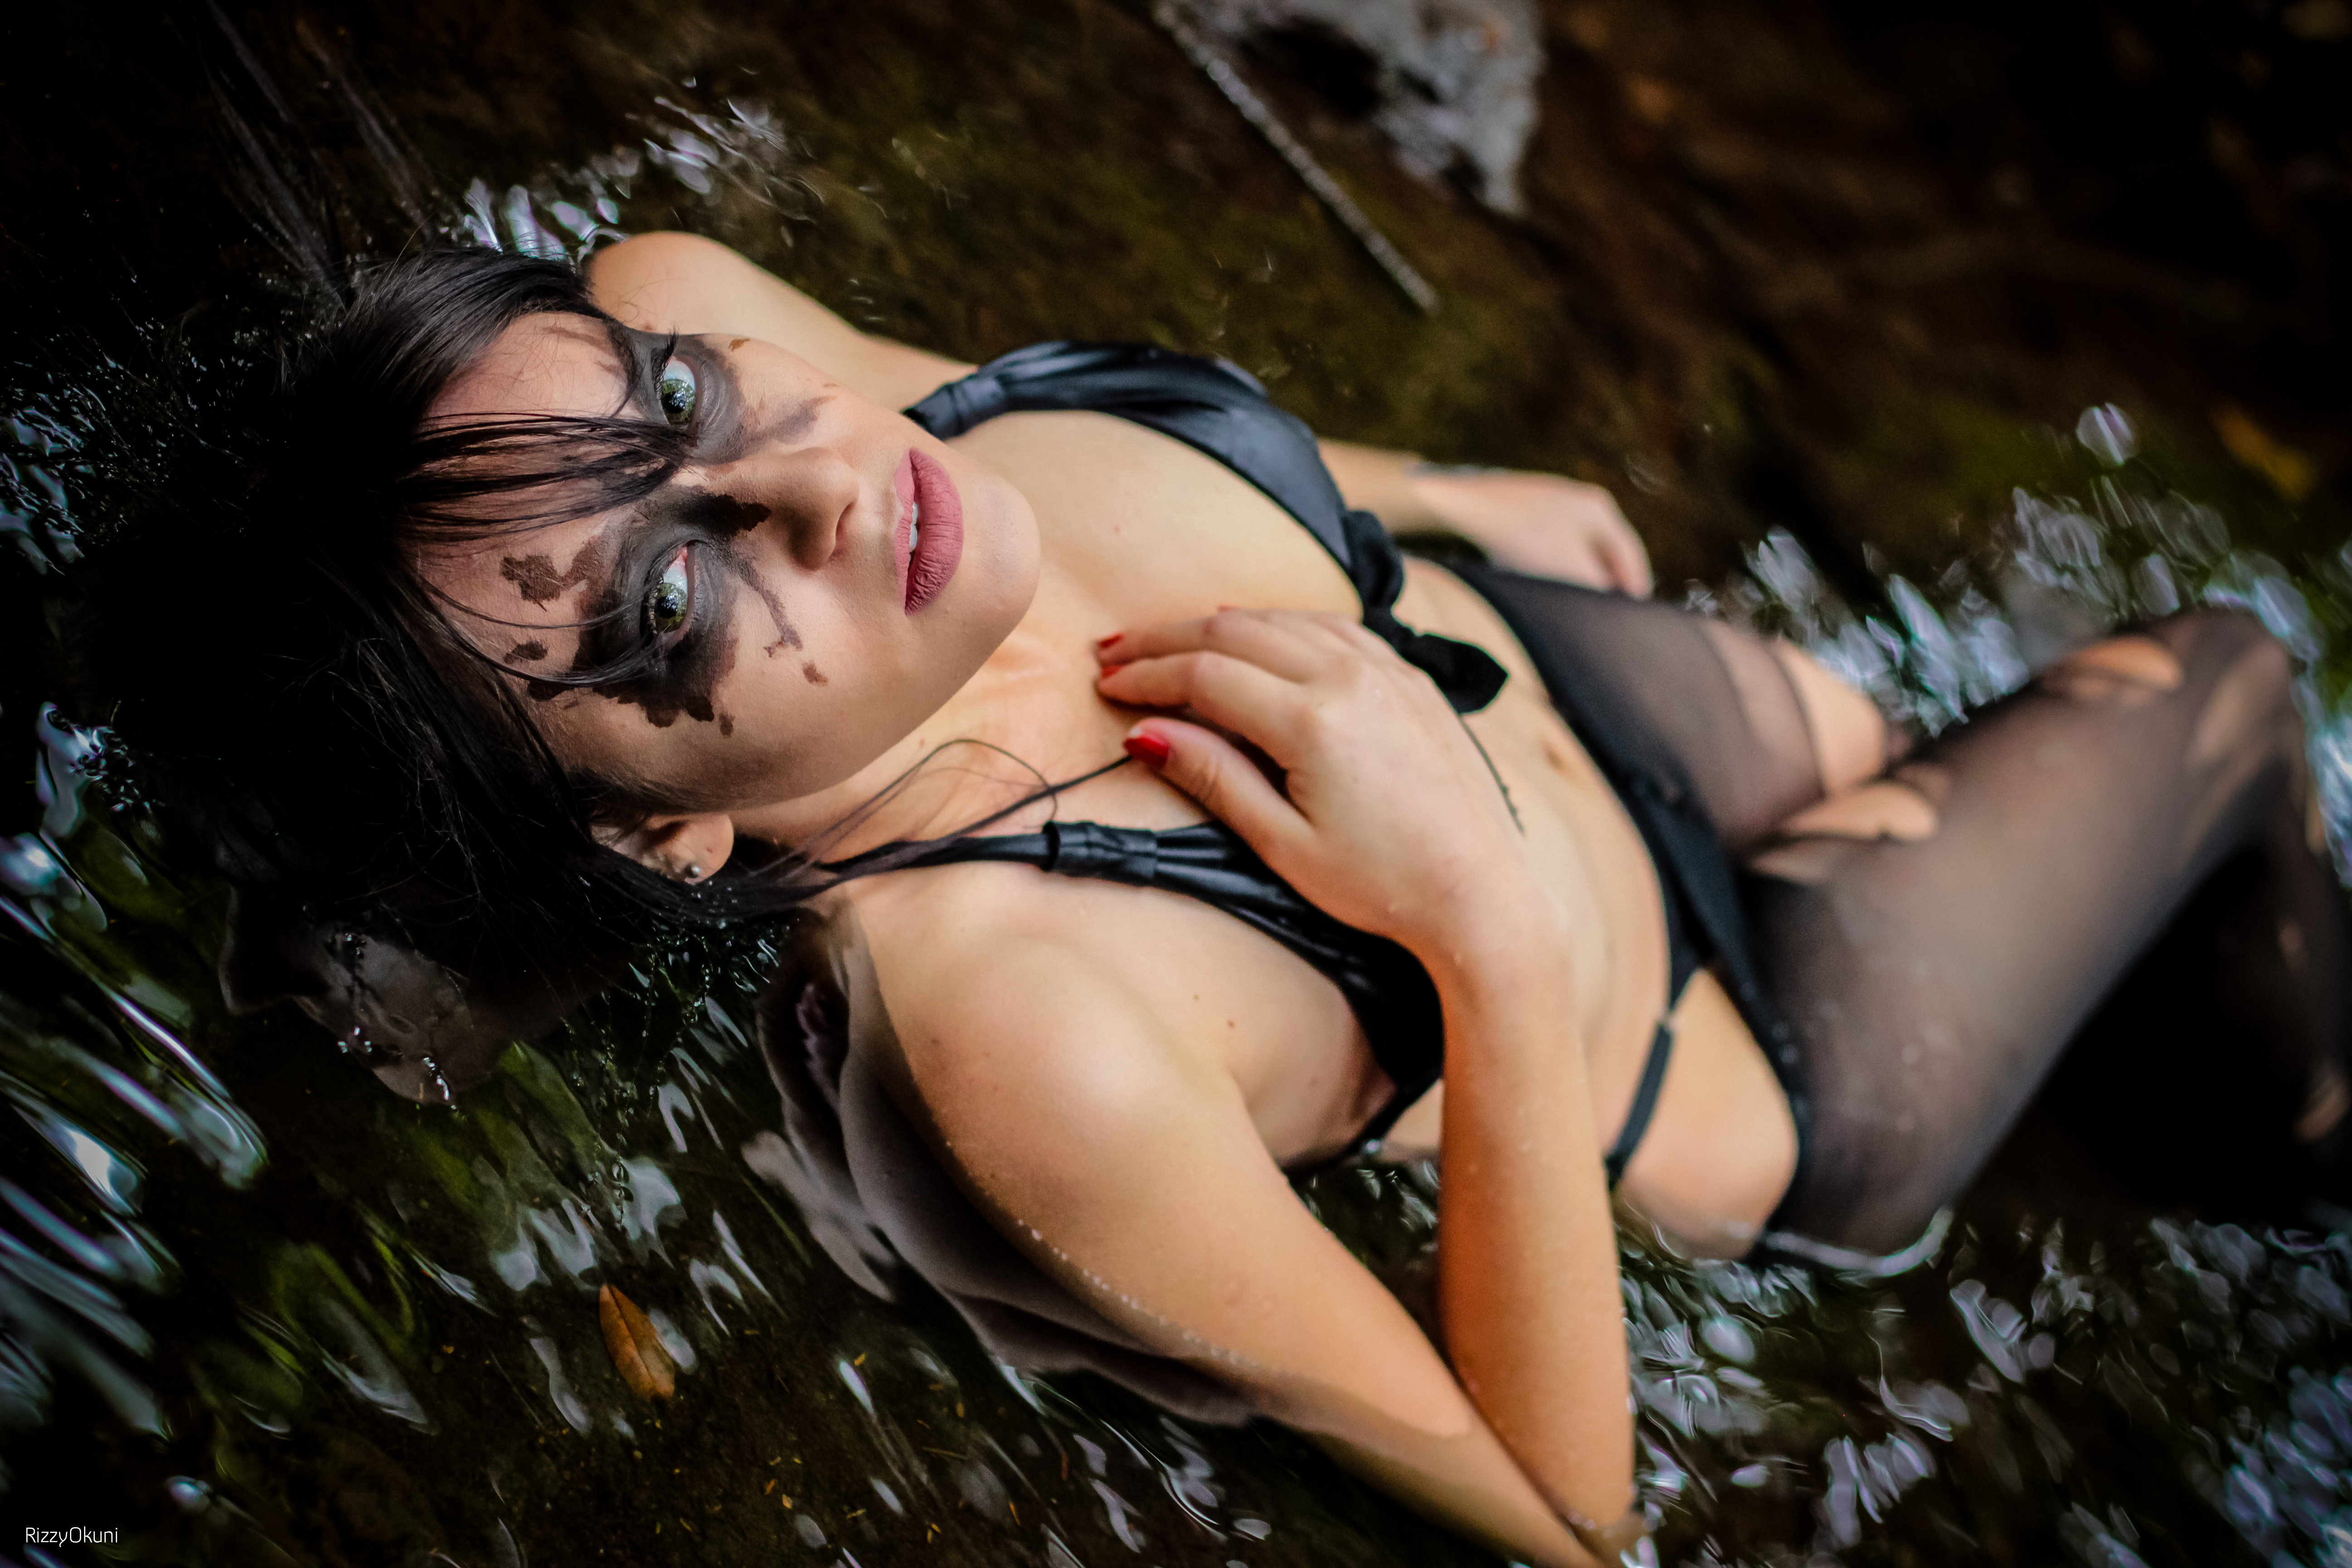 People 5184x3456 Metal Gear Solid V: The Phantom Pain video games women brunette cleavage Quiet (metal gear) Metal Gear stockings cosplay photography